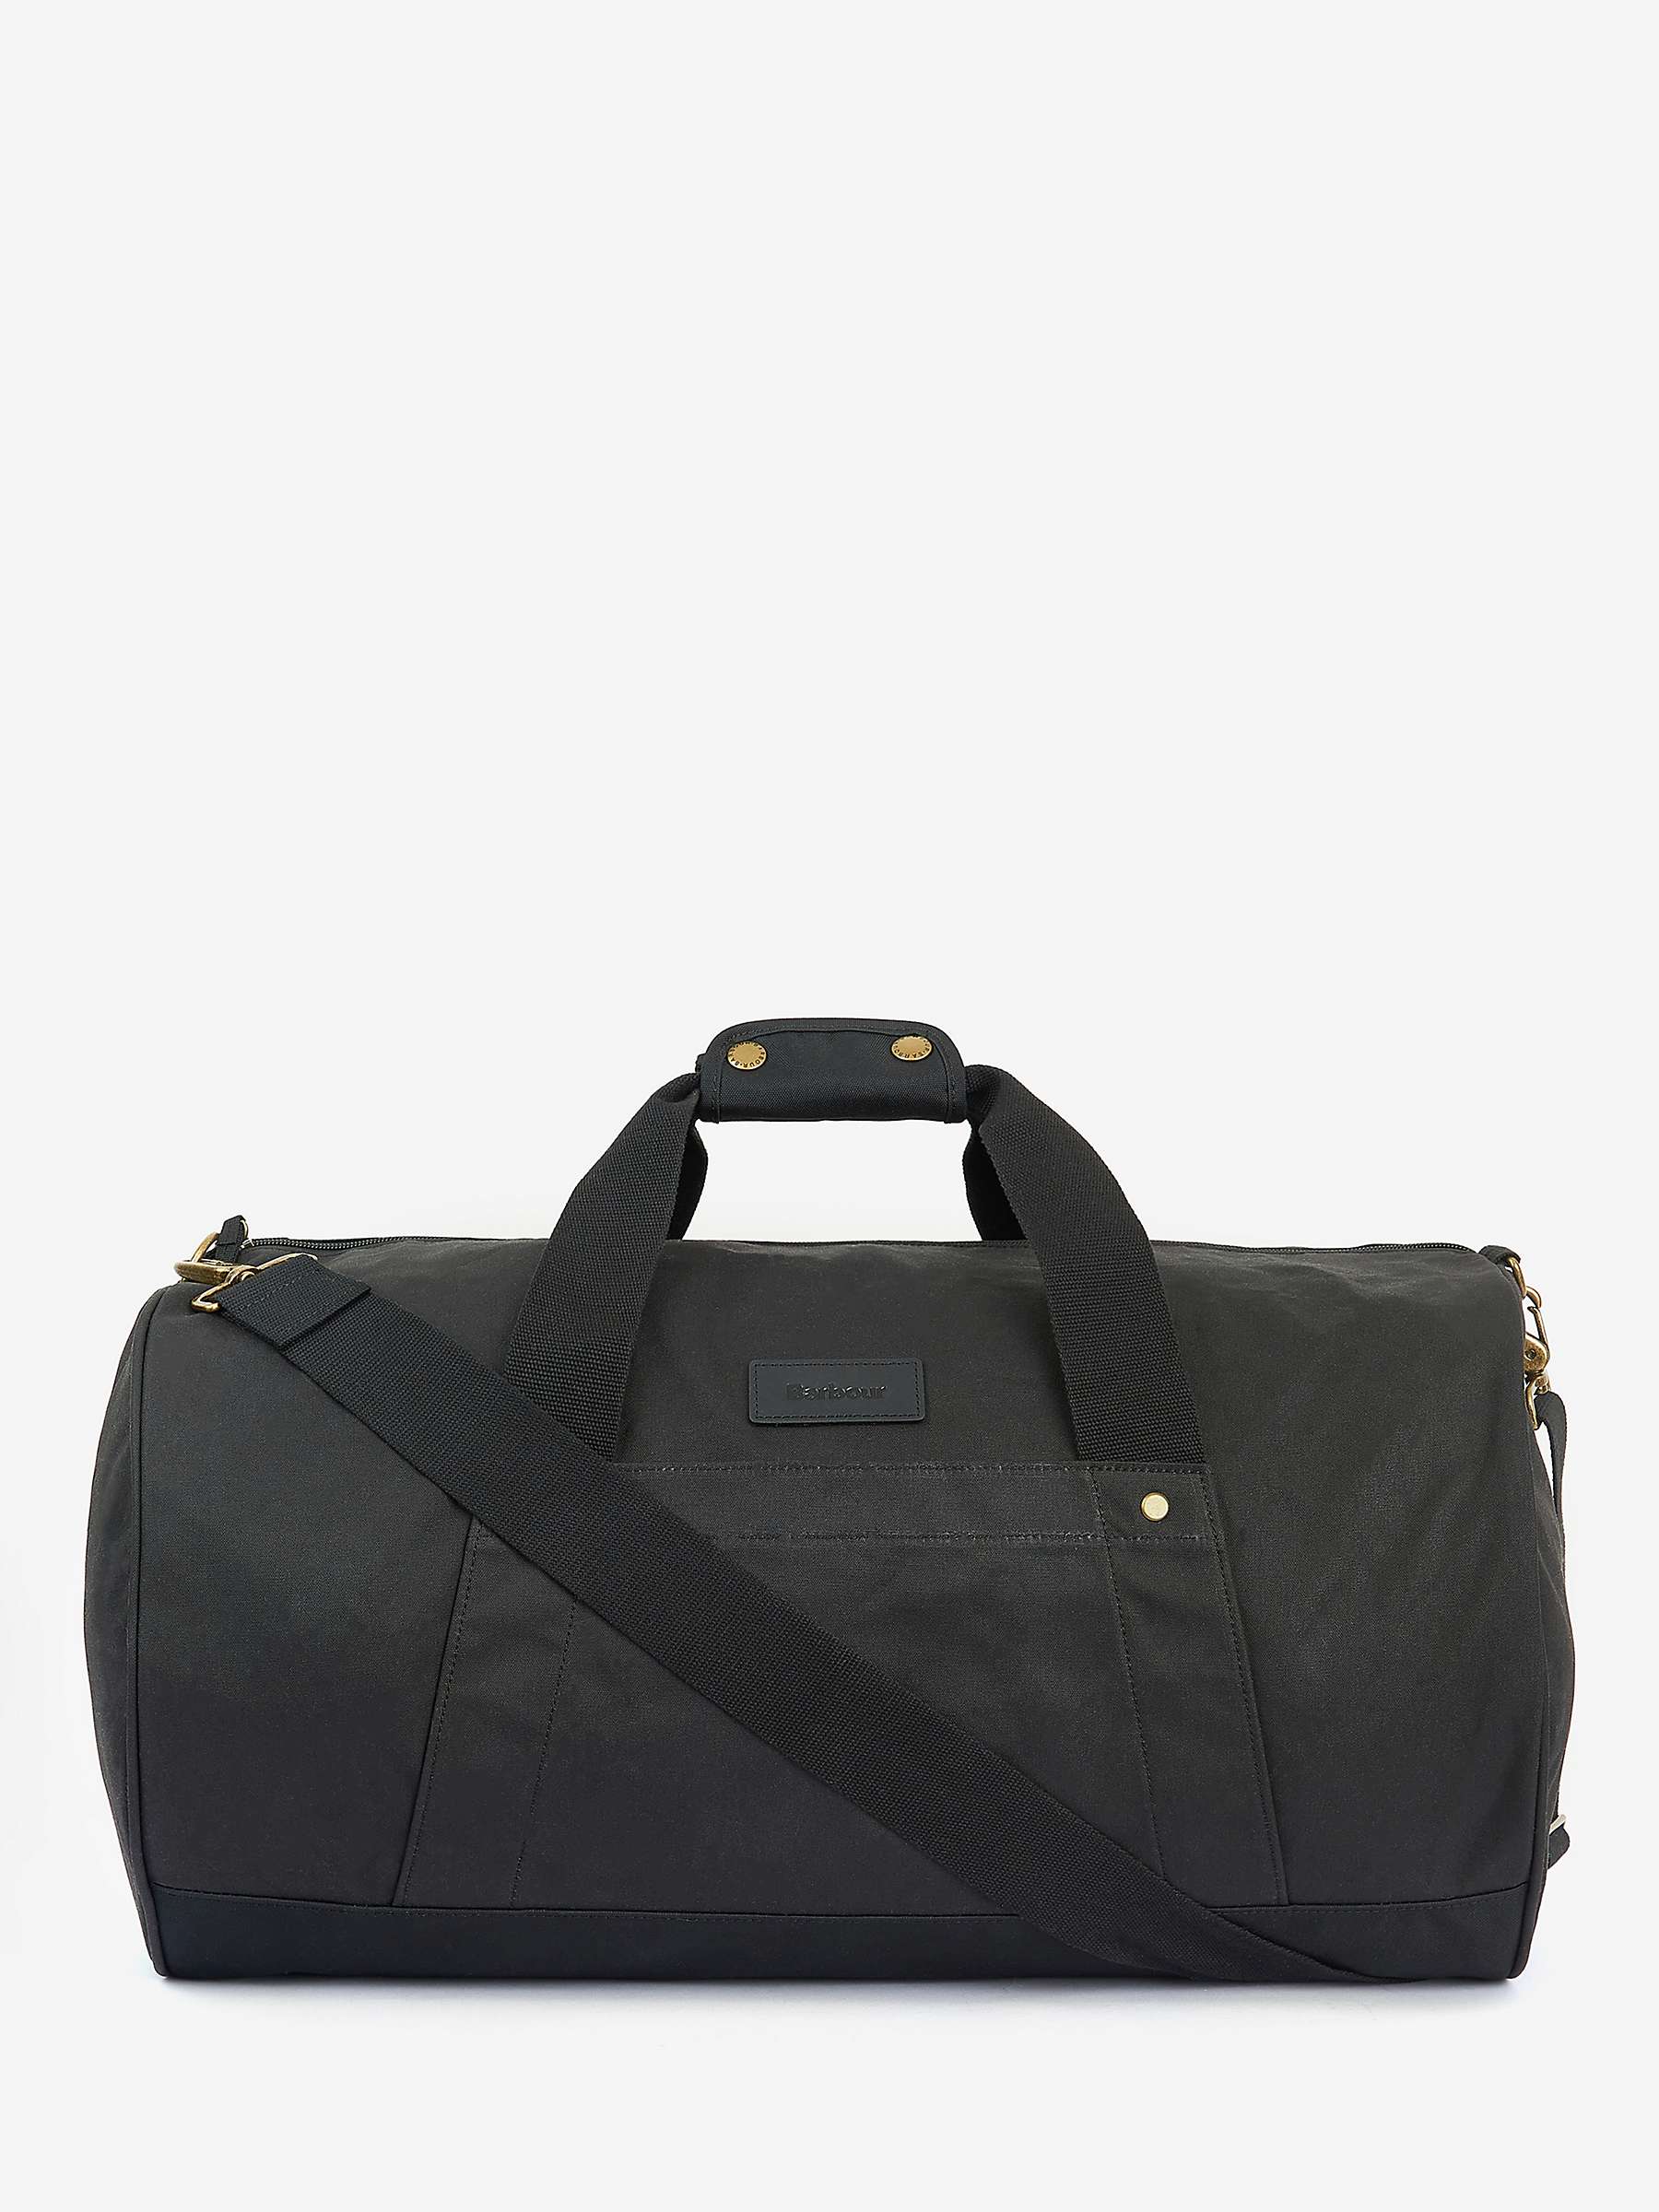 Barbour Barrell Wax Cotton Holdall, Black at John Lewis & Partners